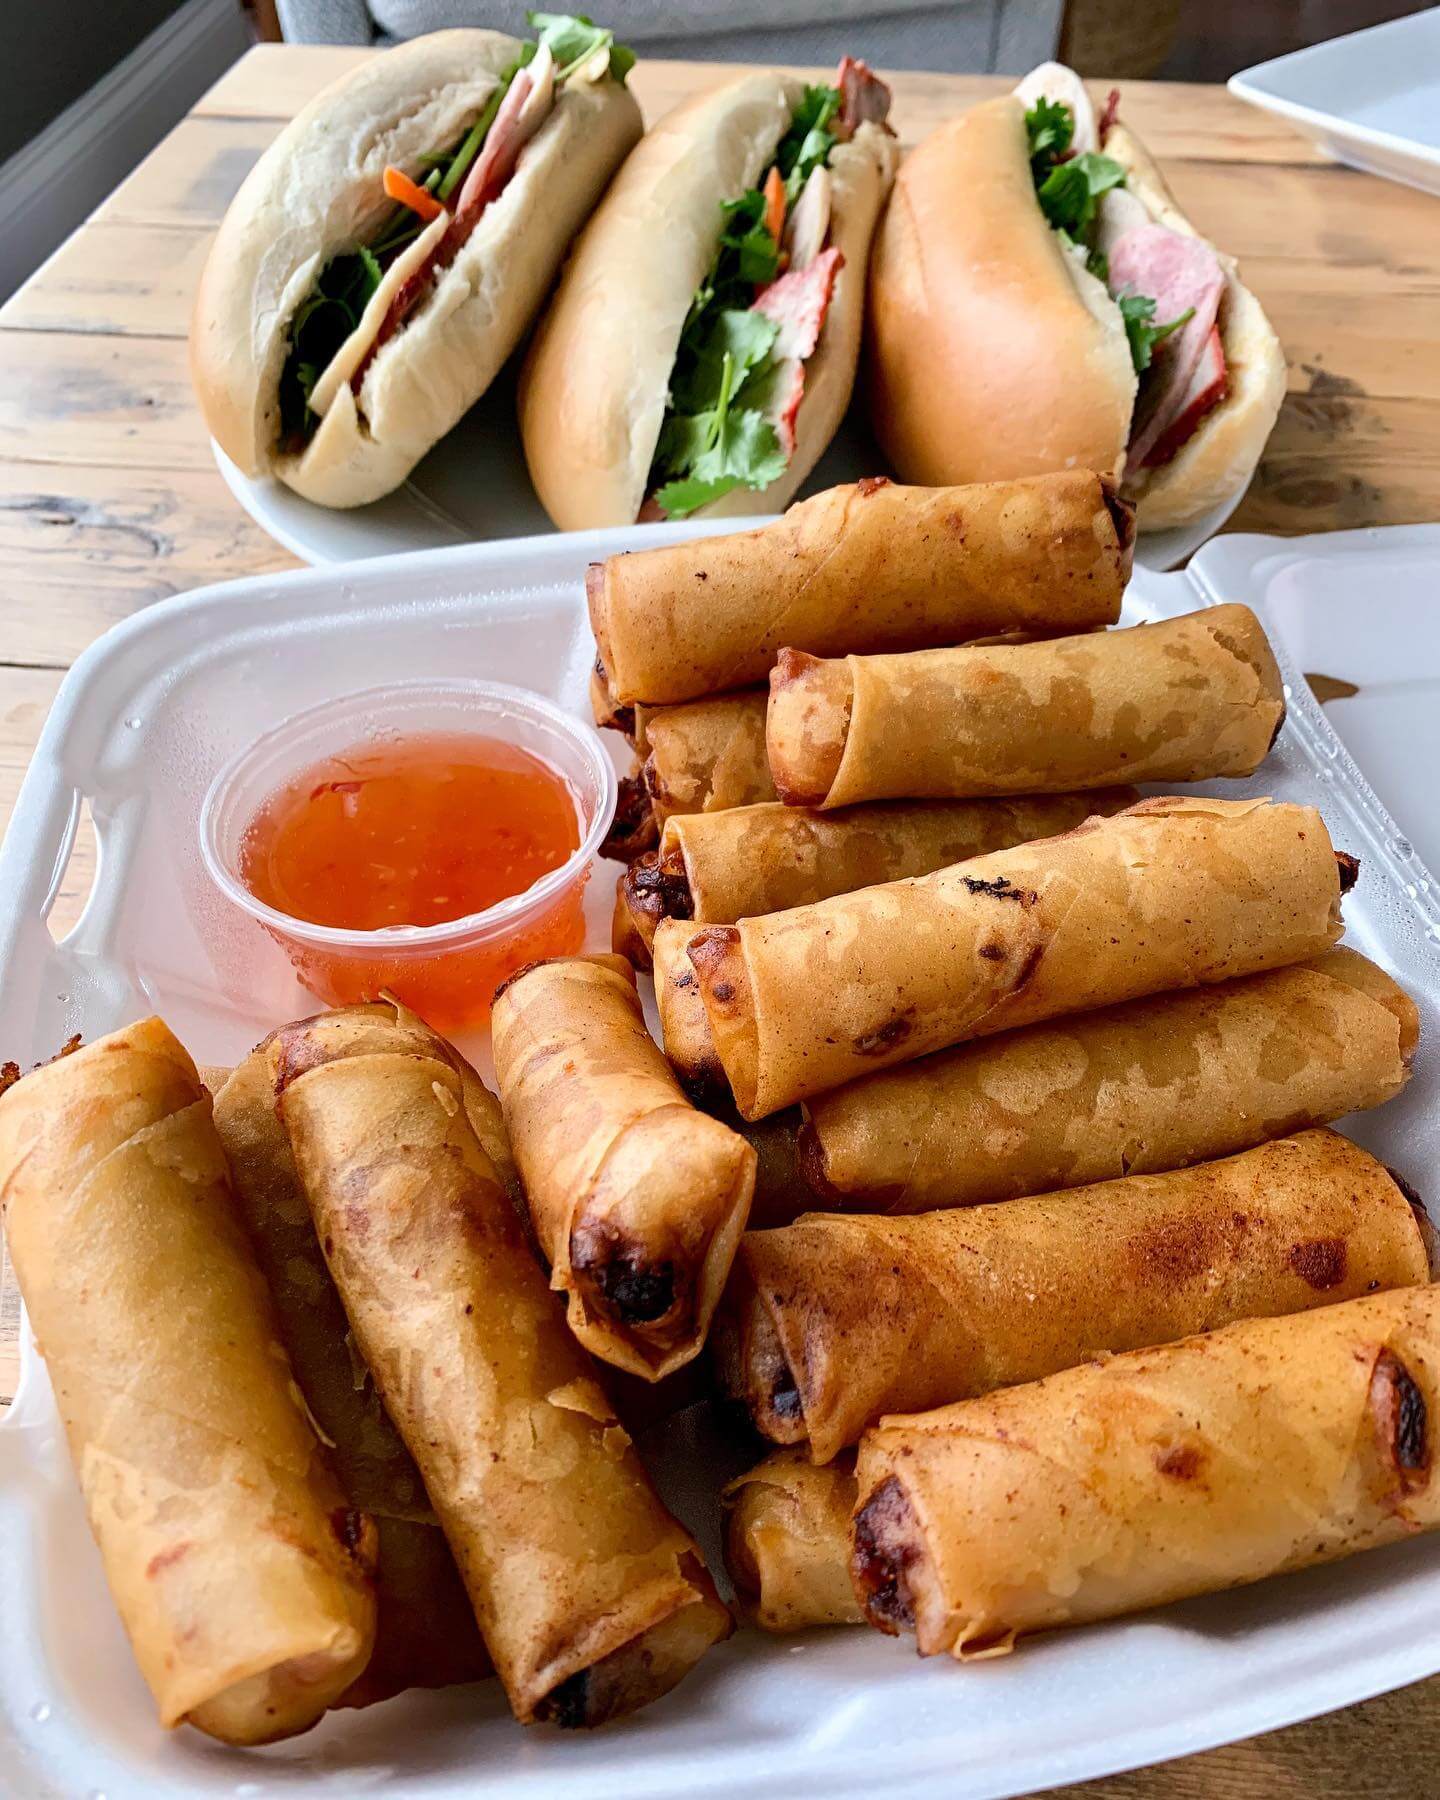 Three sandwiches on the upper section of a table, and twelve egg rolls within a dish next to a orange sauce